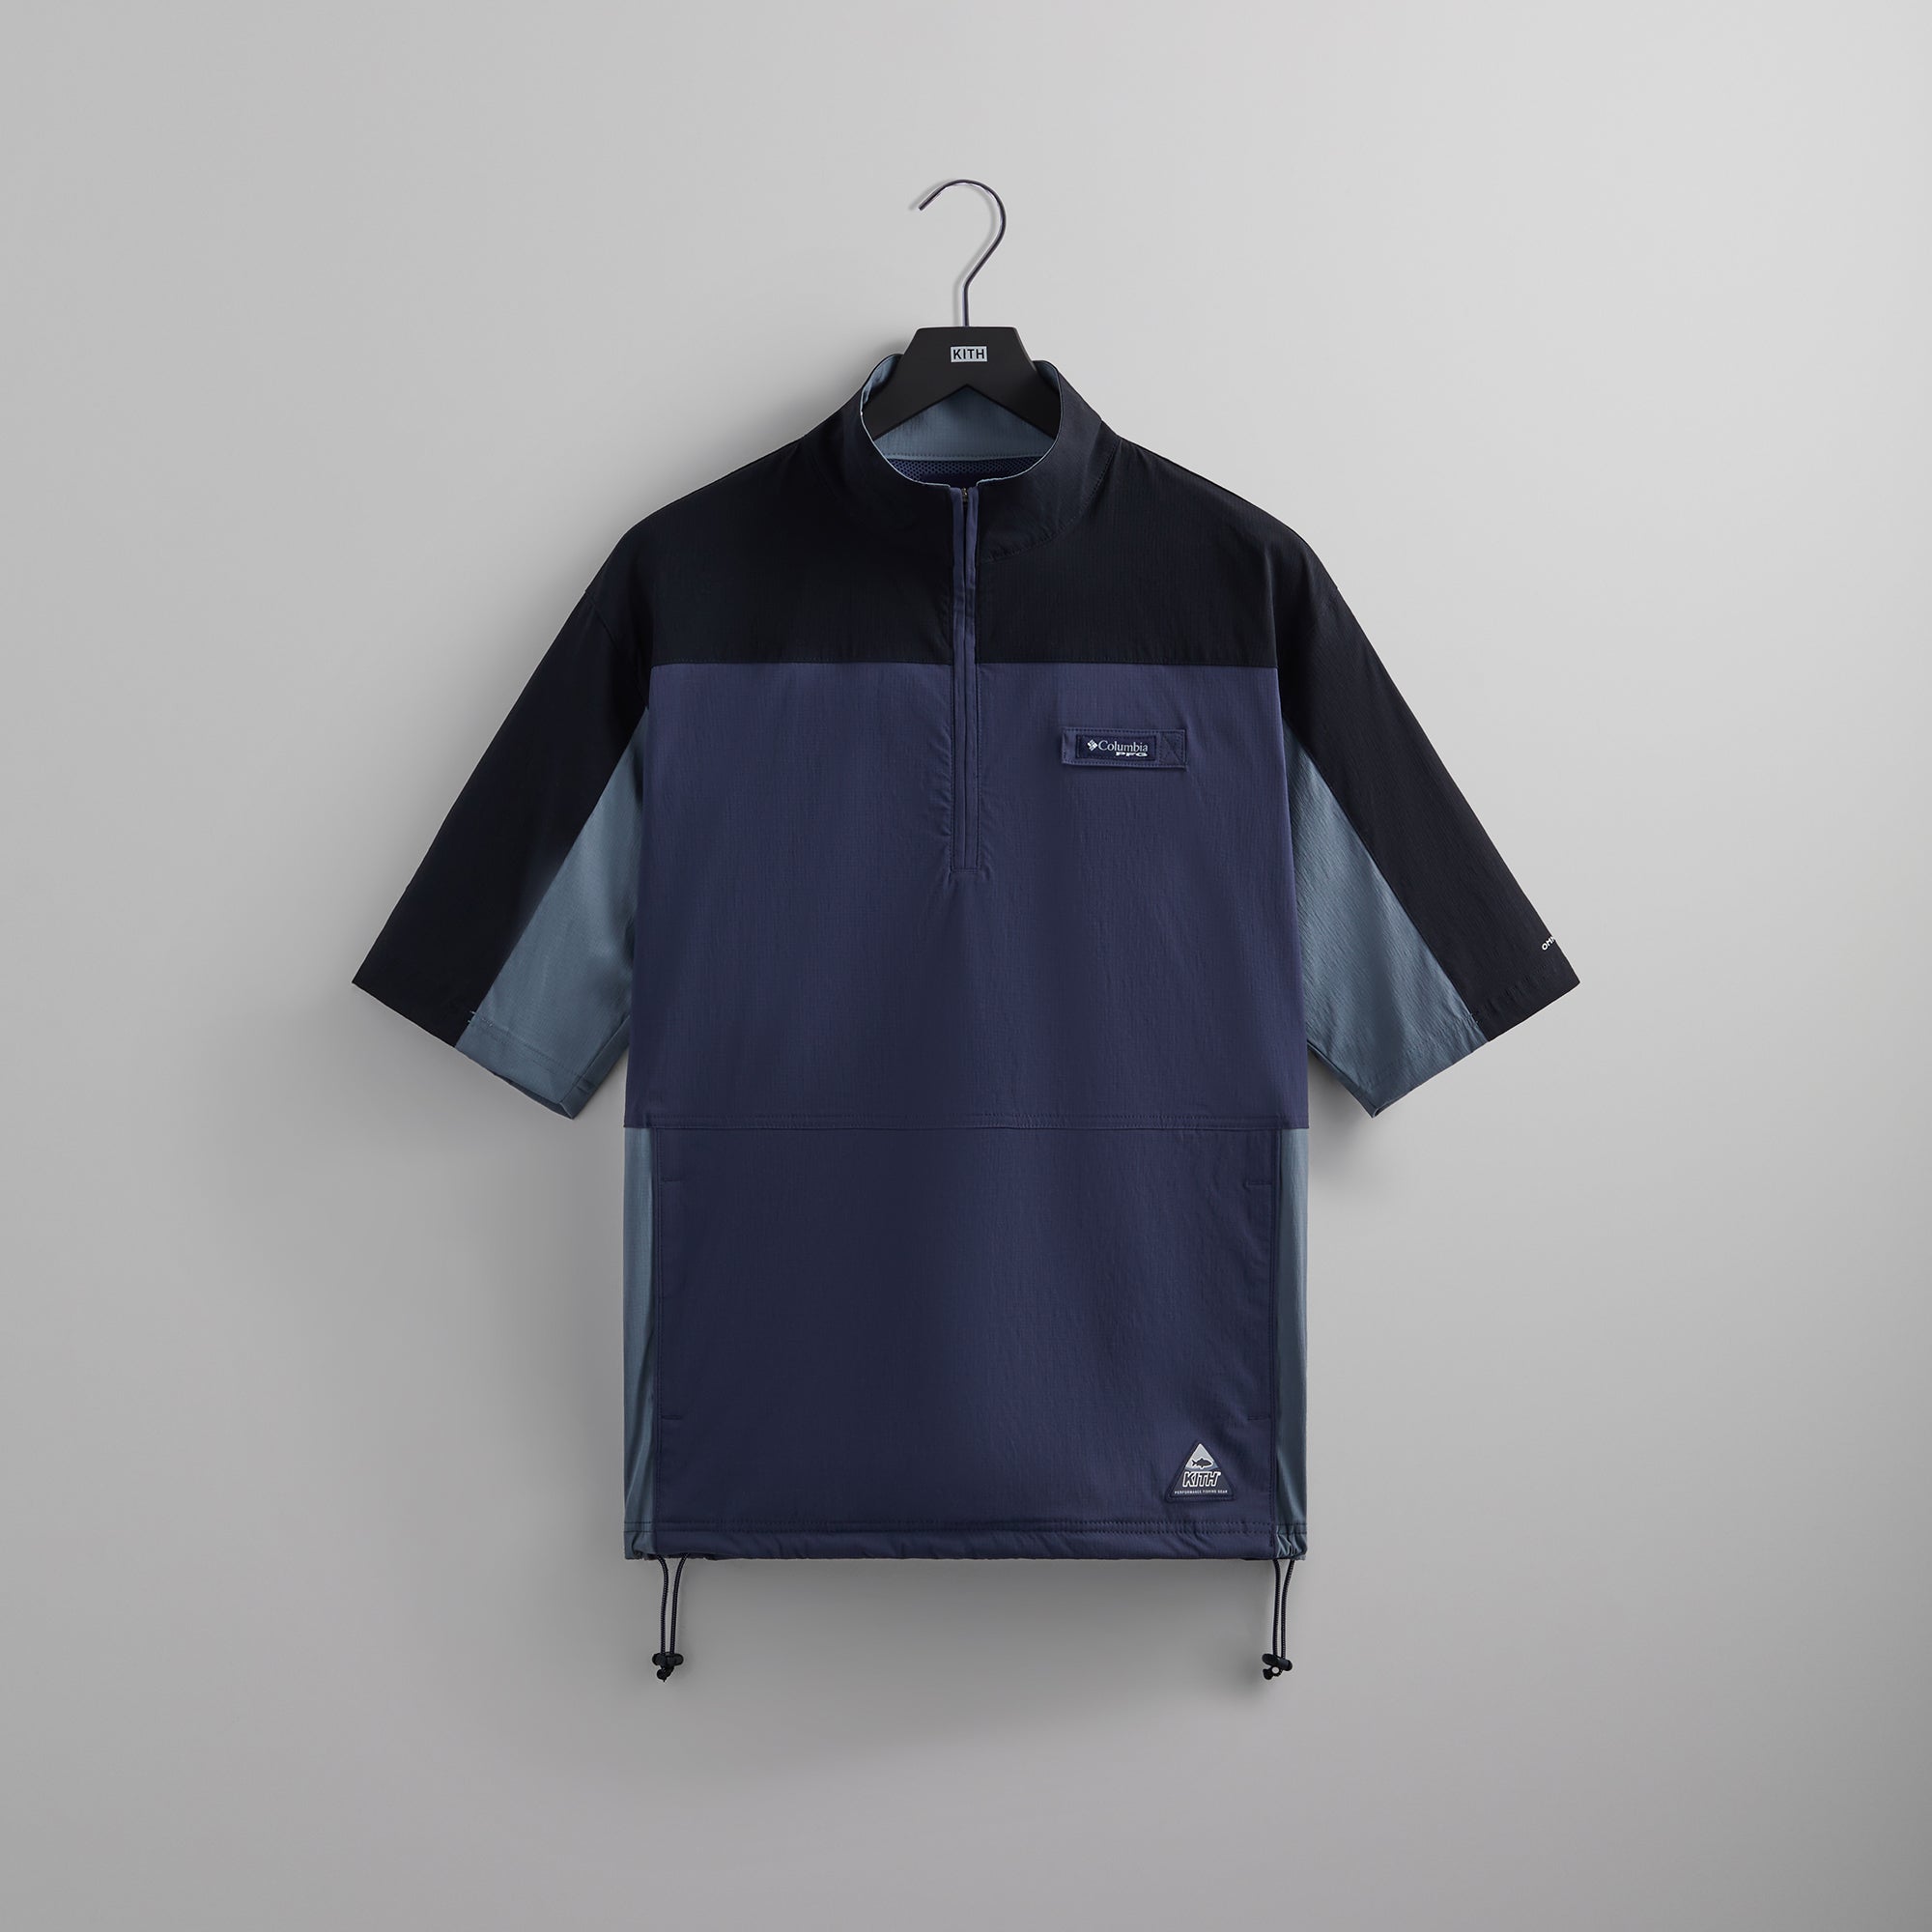 Kith for Columbia PFG Links Windshirt - Nocturnal